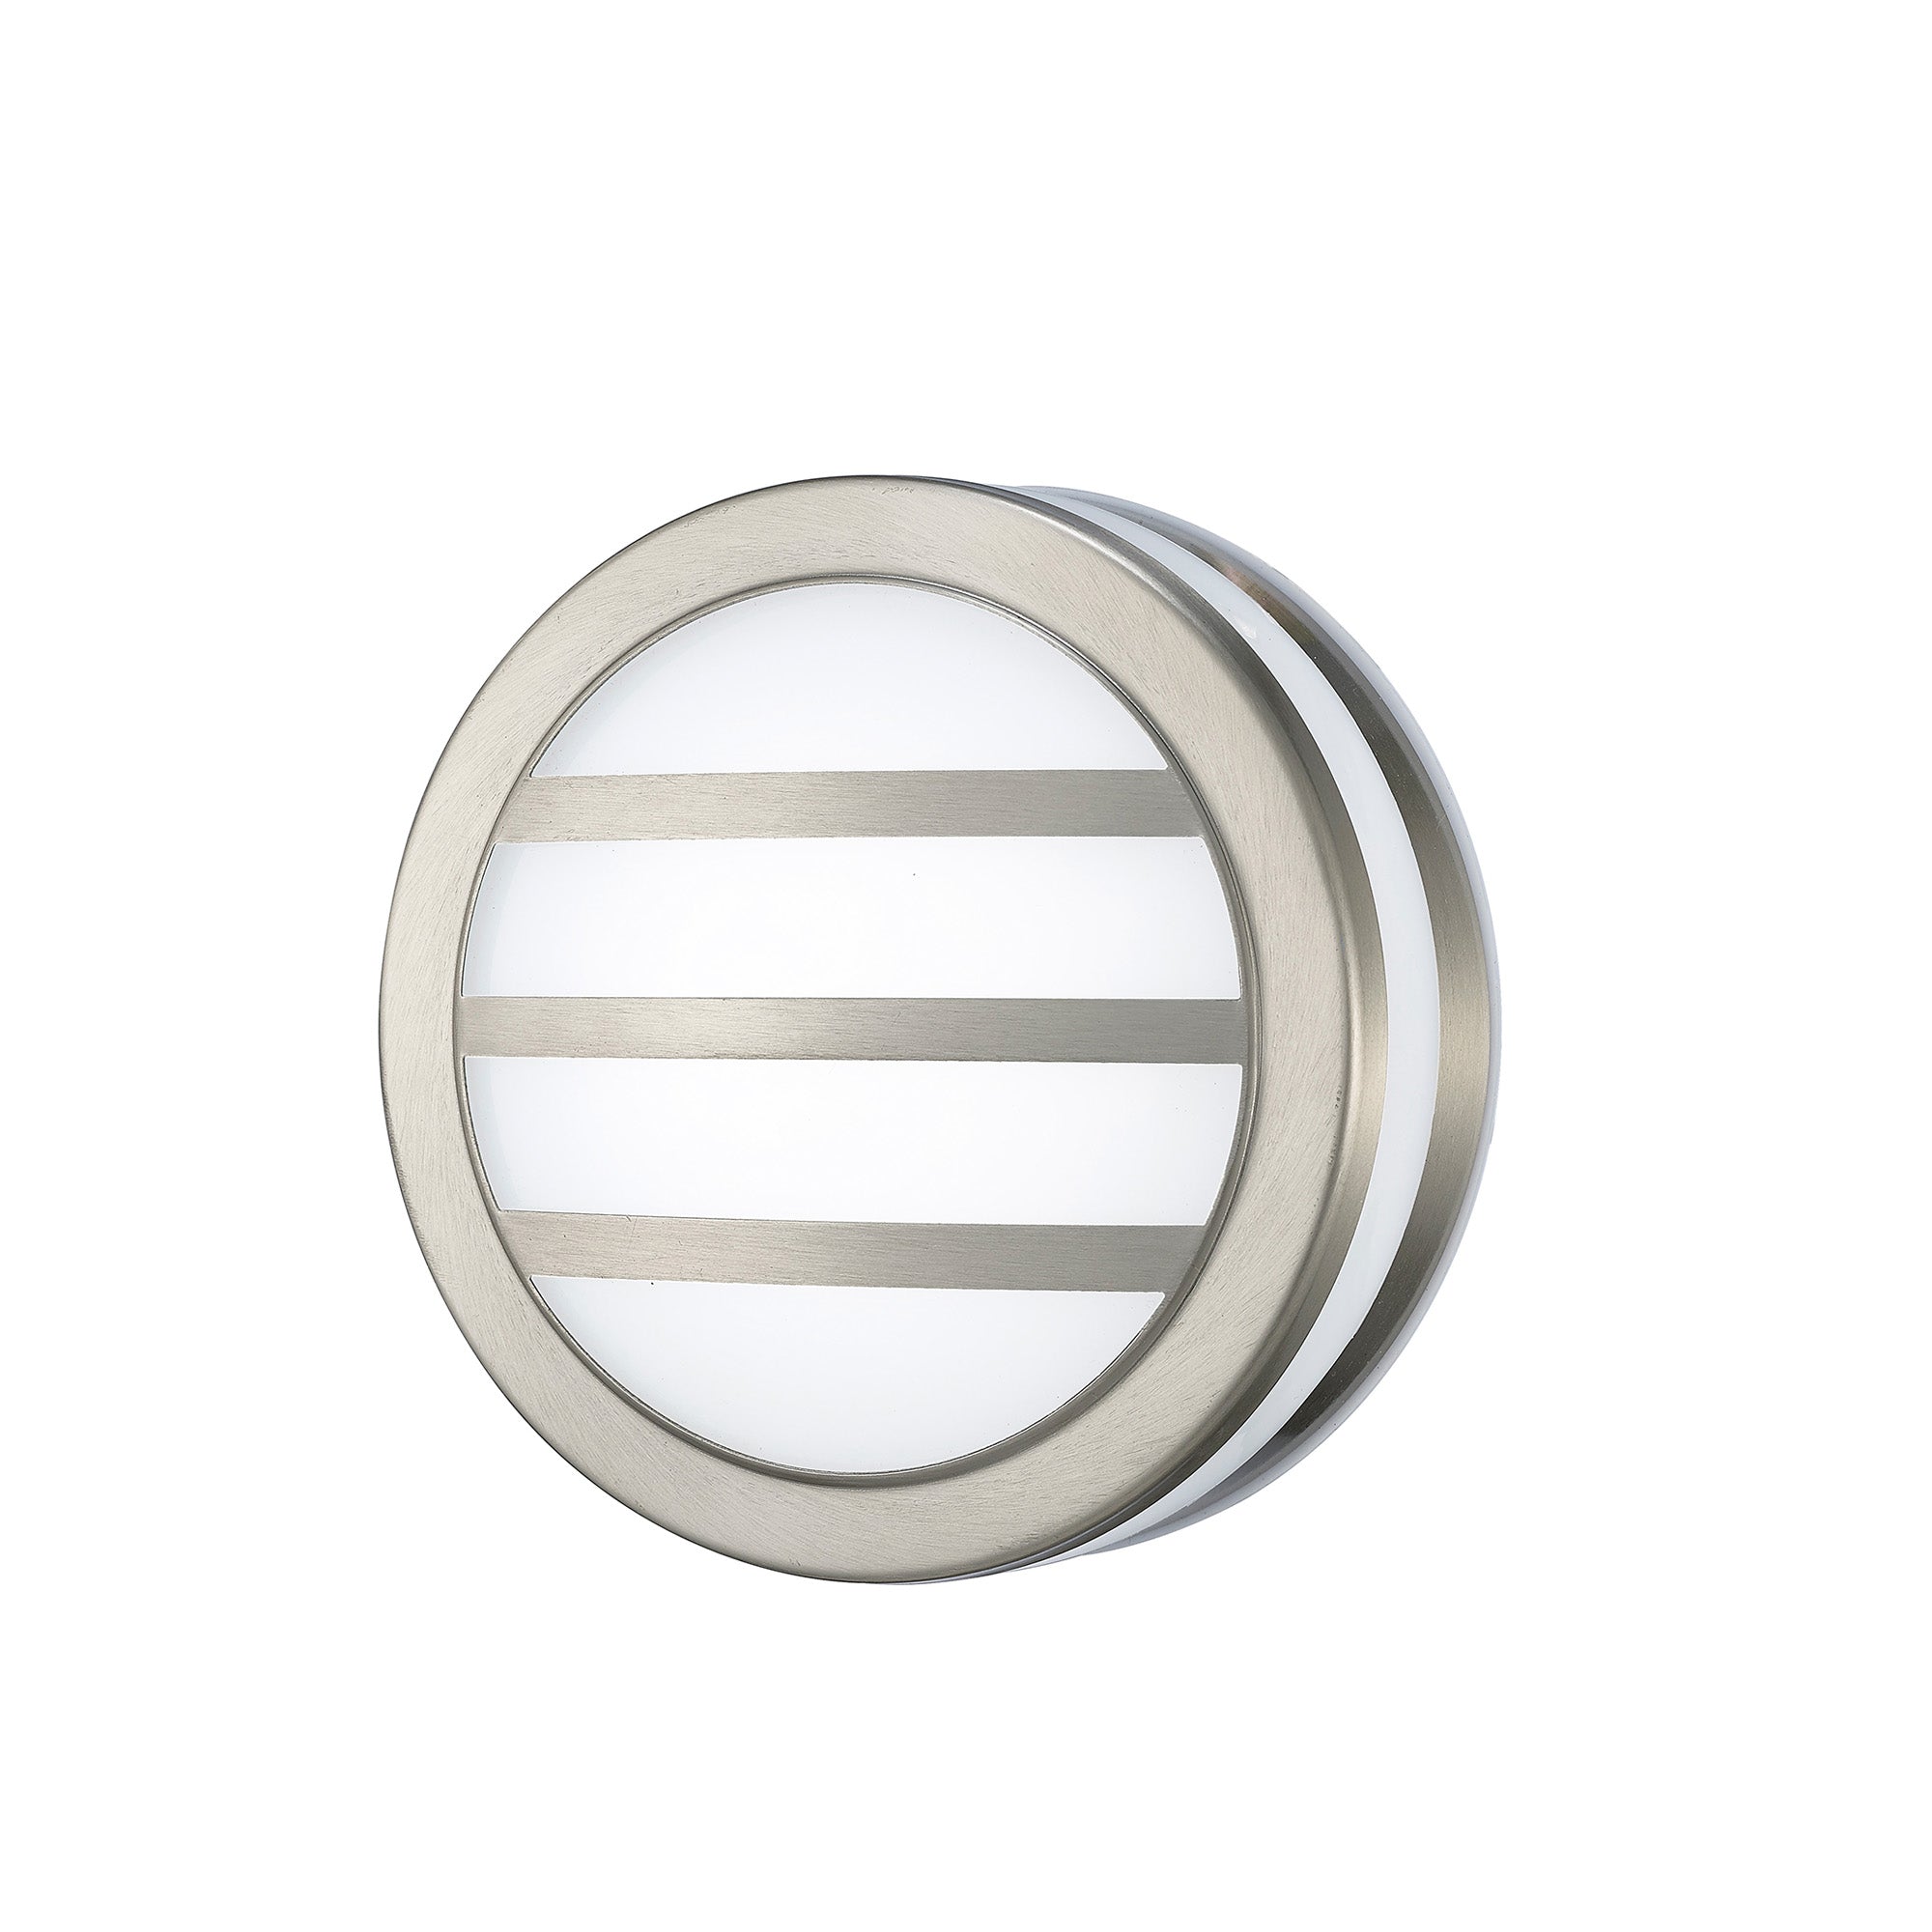 Aldo Square/Round Flush Ceiling/Wall Lamp 2.4W LED IP44 Exterior Plain Design Stainless Steel/Opal, 2yrs Warranty